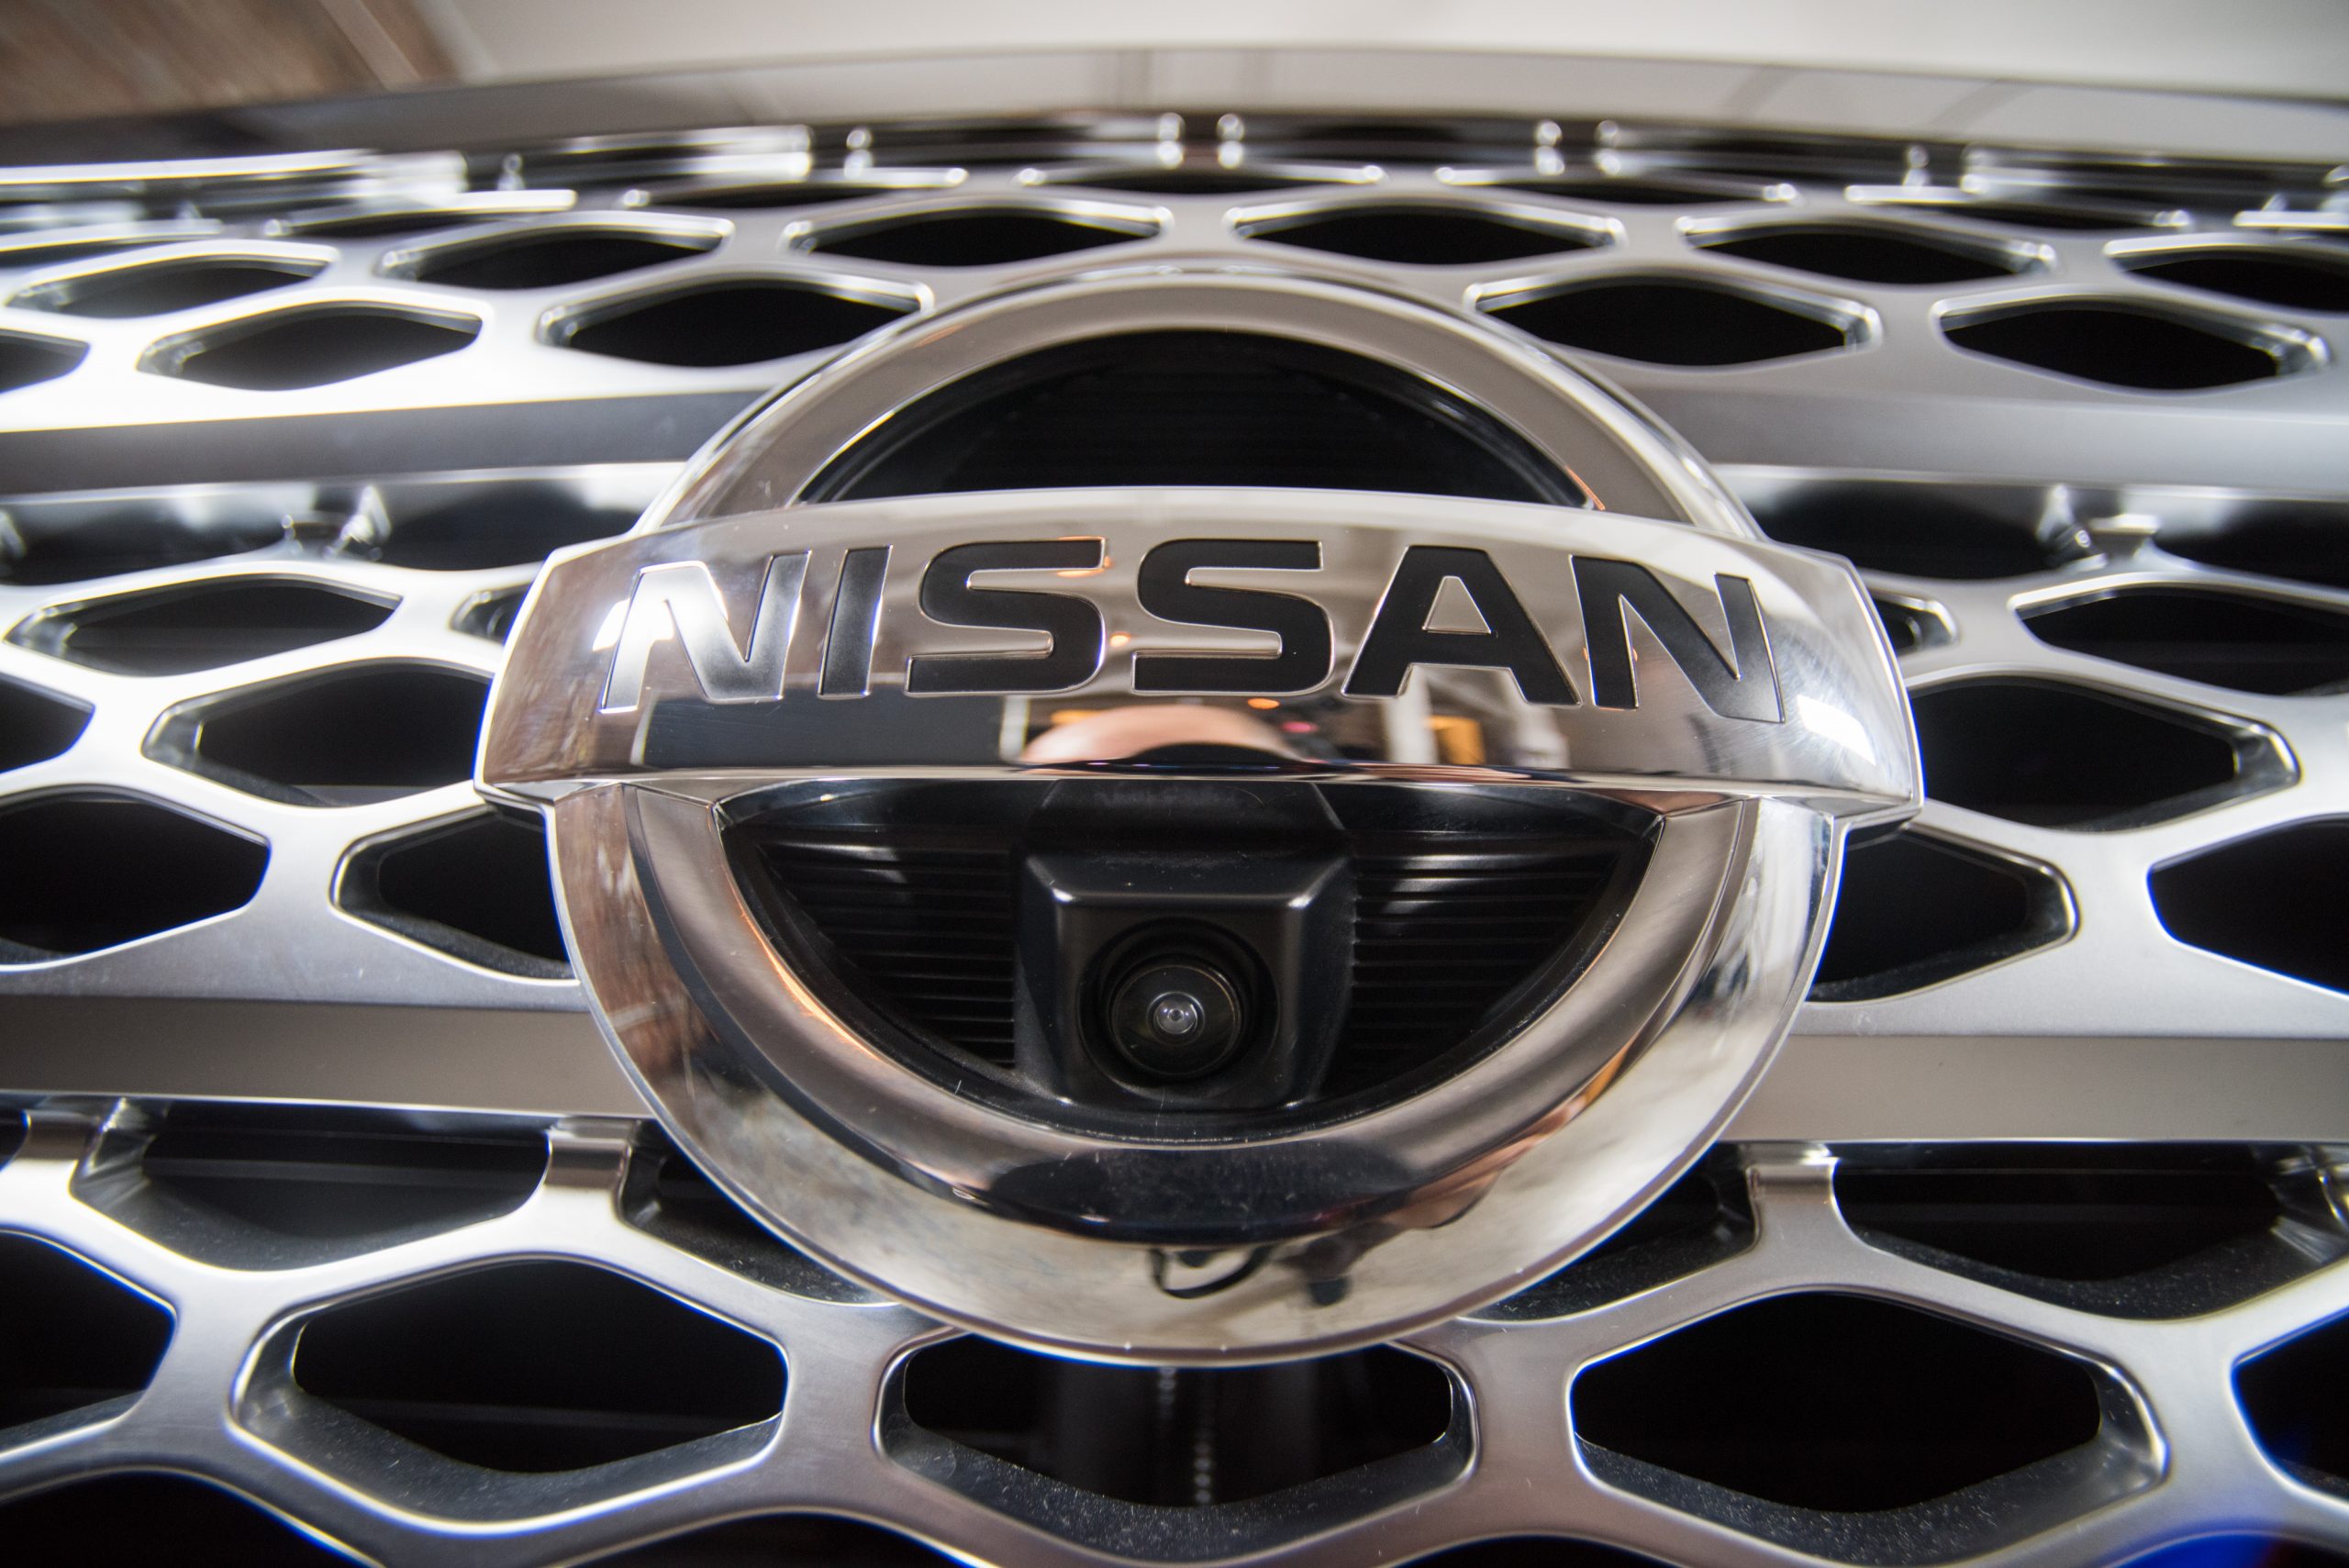 Upclose look at the grill and front camera of the Nissan Titan pickup truck